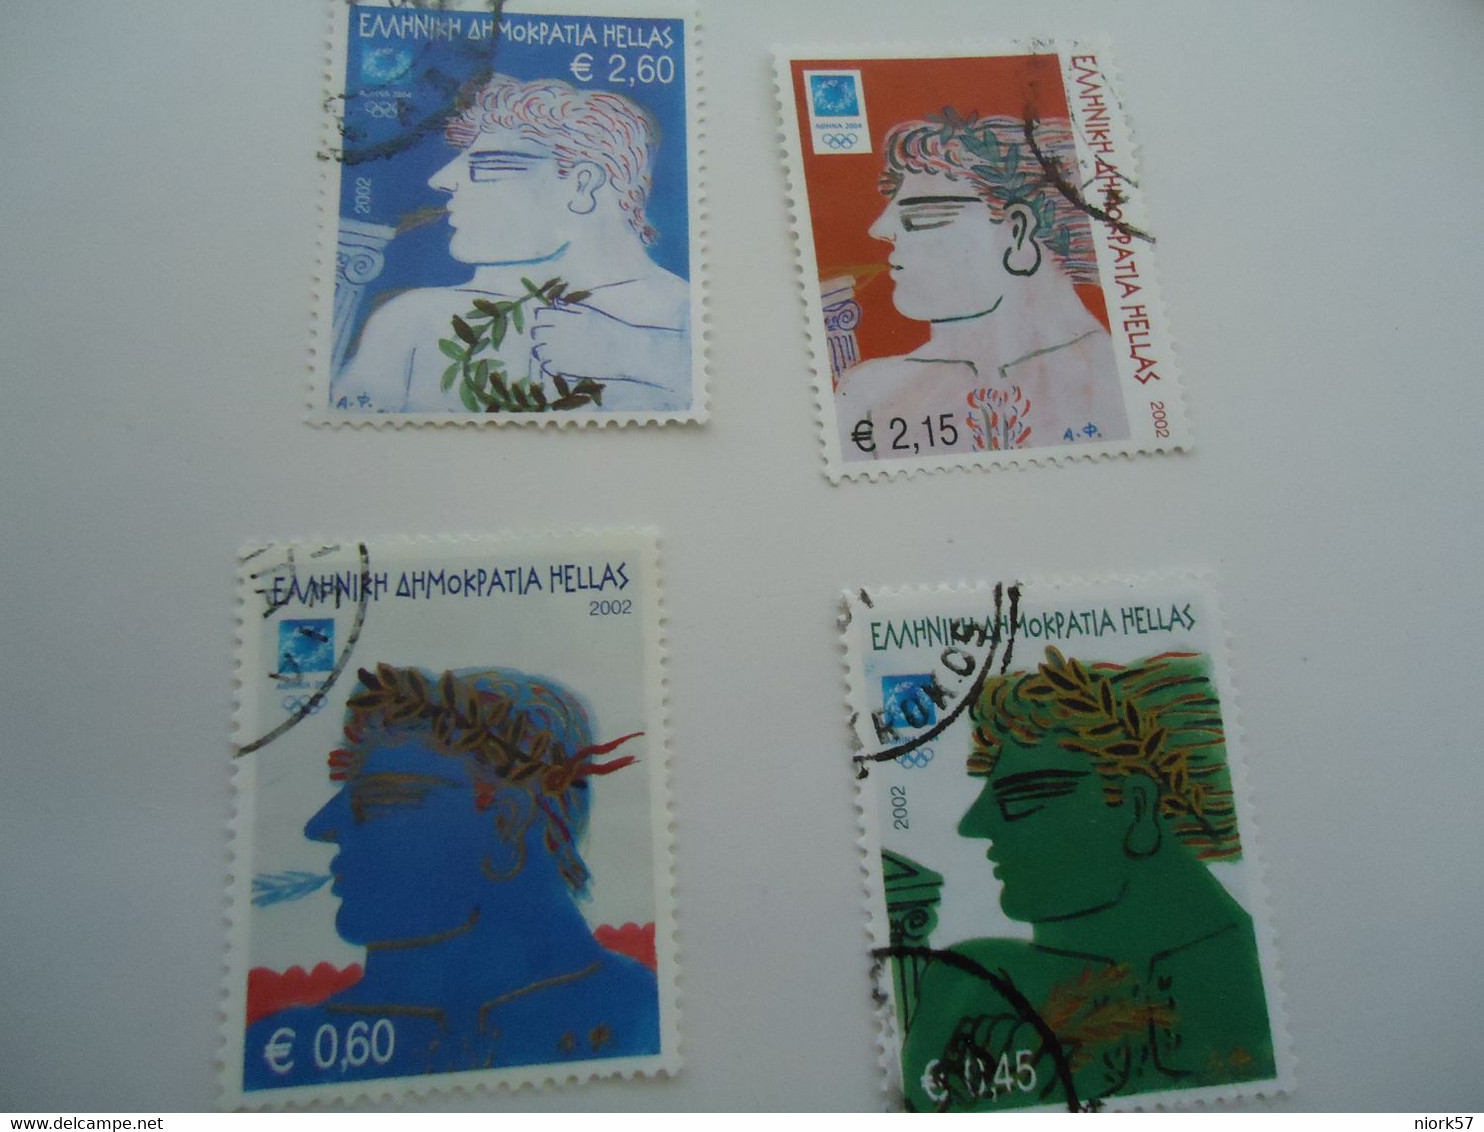 GREECE USED STAMPS SET 4 OLYMPIG GAMES ATHENS 2004 HE WINNERS 2002 - Sommer 2004: Athen - Paralympics